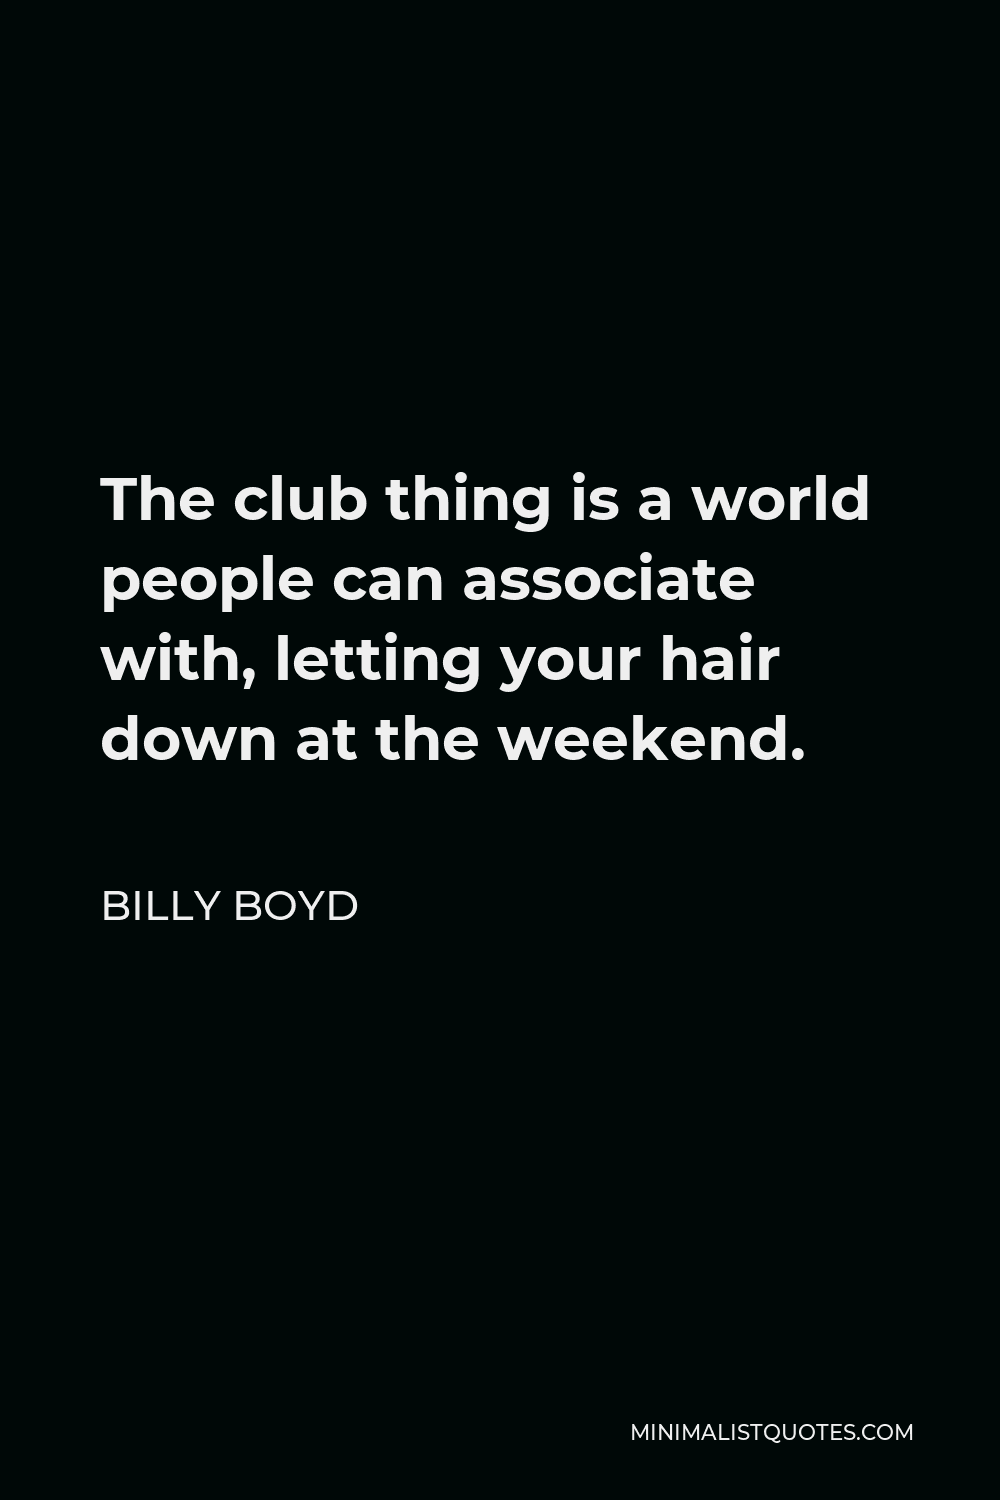 Billy Boyd Quote - The club thing is a world people can associate with, letting your hair down at the weekend.